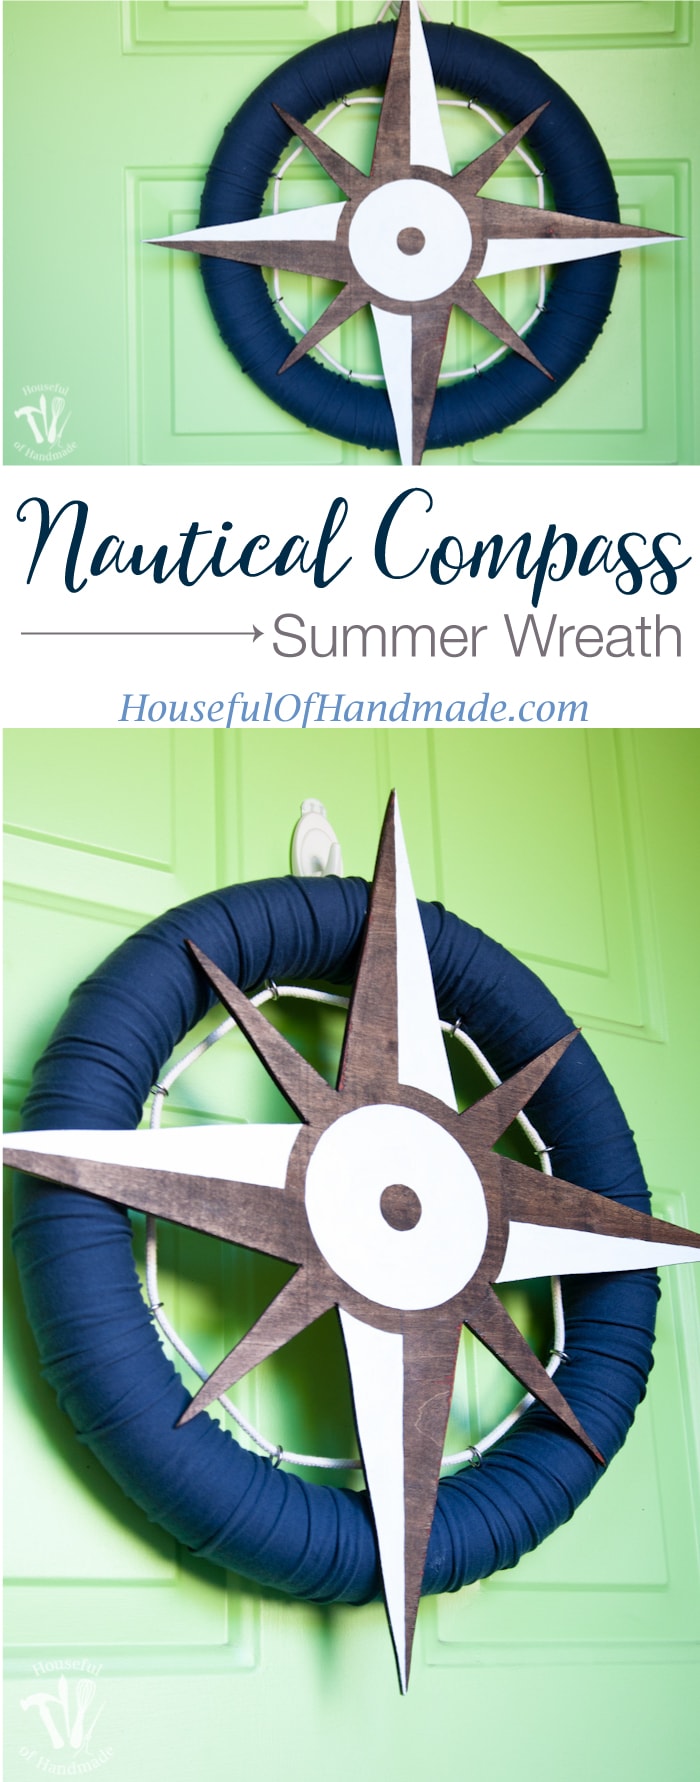 I love nautical decoration for summer! You can make this fun nautical compass wreath out of a pool noodle, old t-shirt and some wood scraps! It's the perfect way to decorate your door this summer. | Housefulofhandmade.com